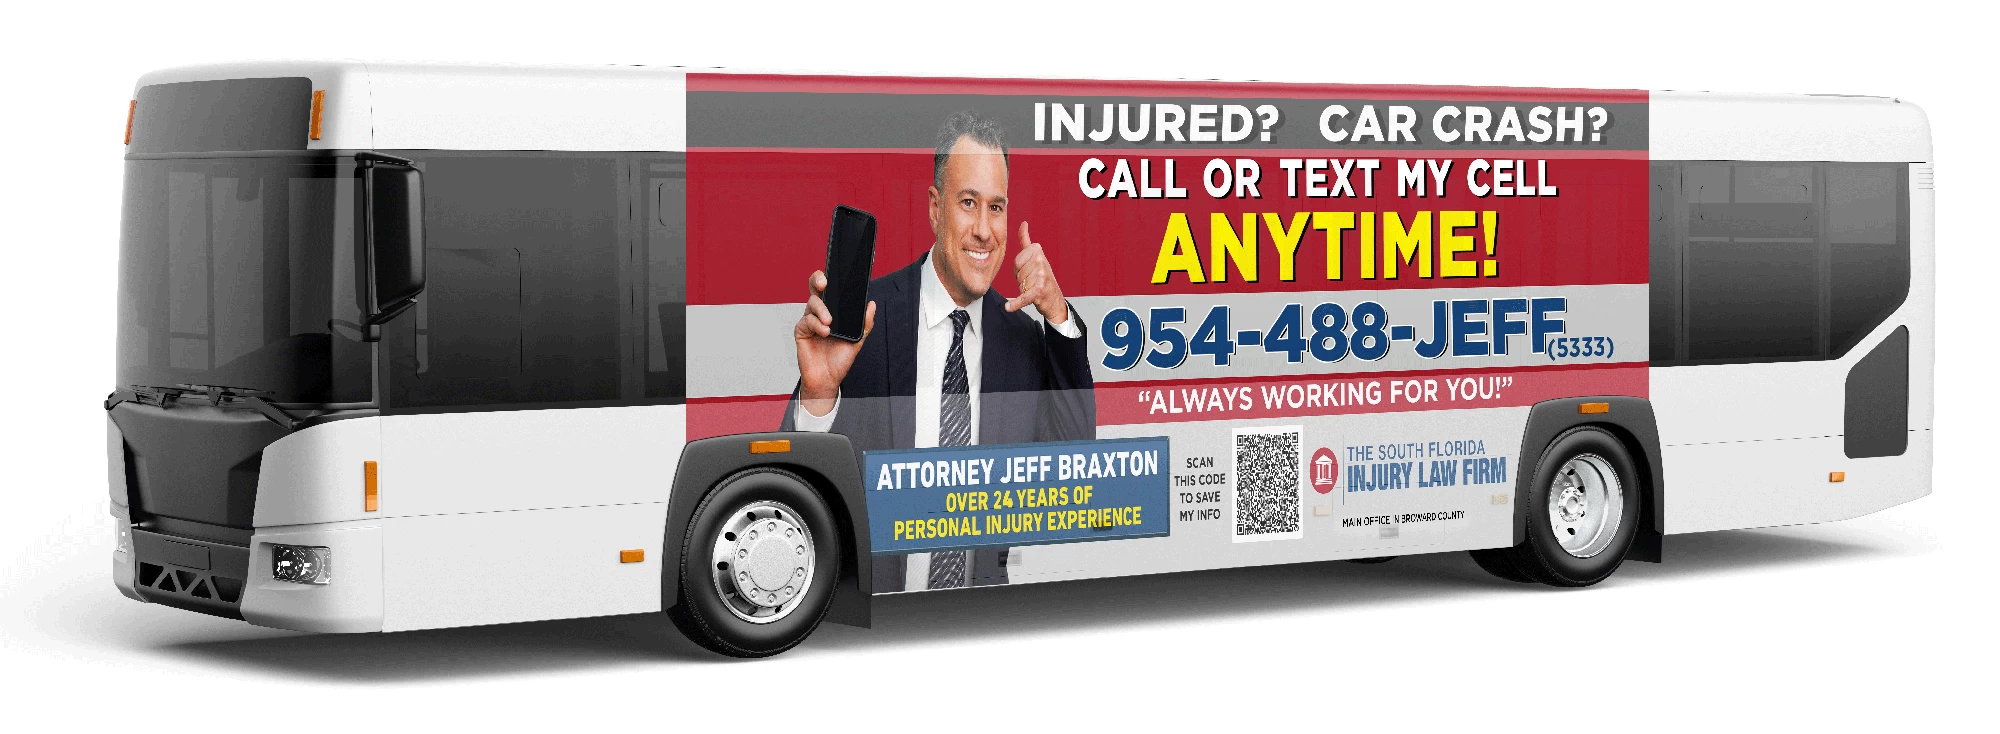 south-florida-injury-law-firm-bus